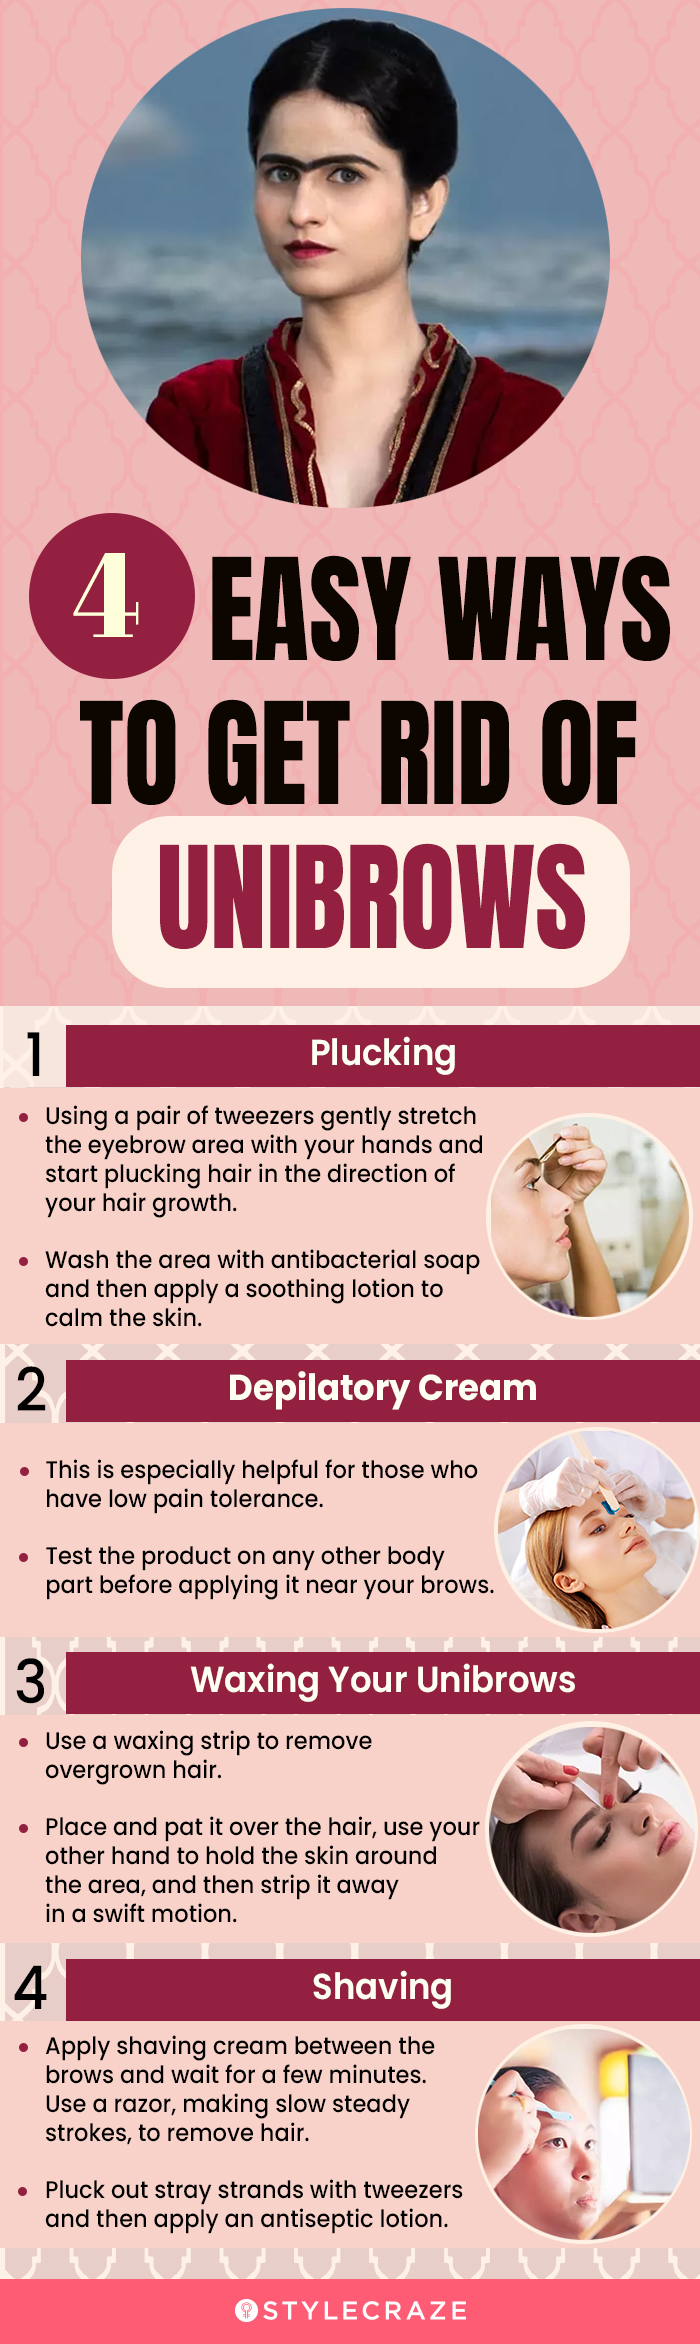 4 easy ways to get rid of unibrows (infographic)